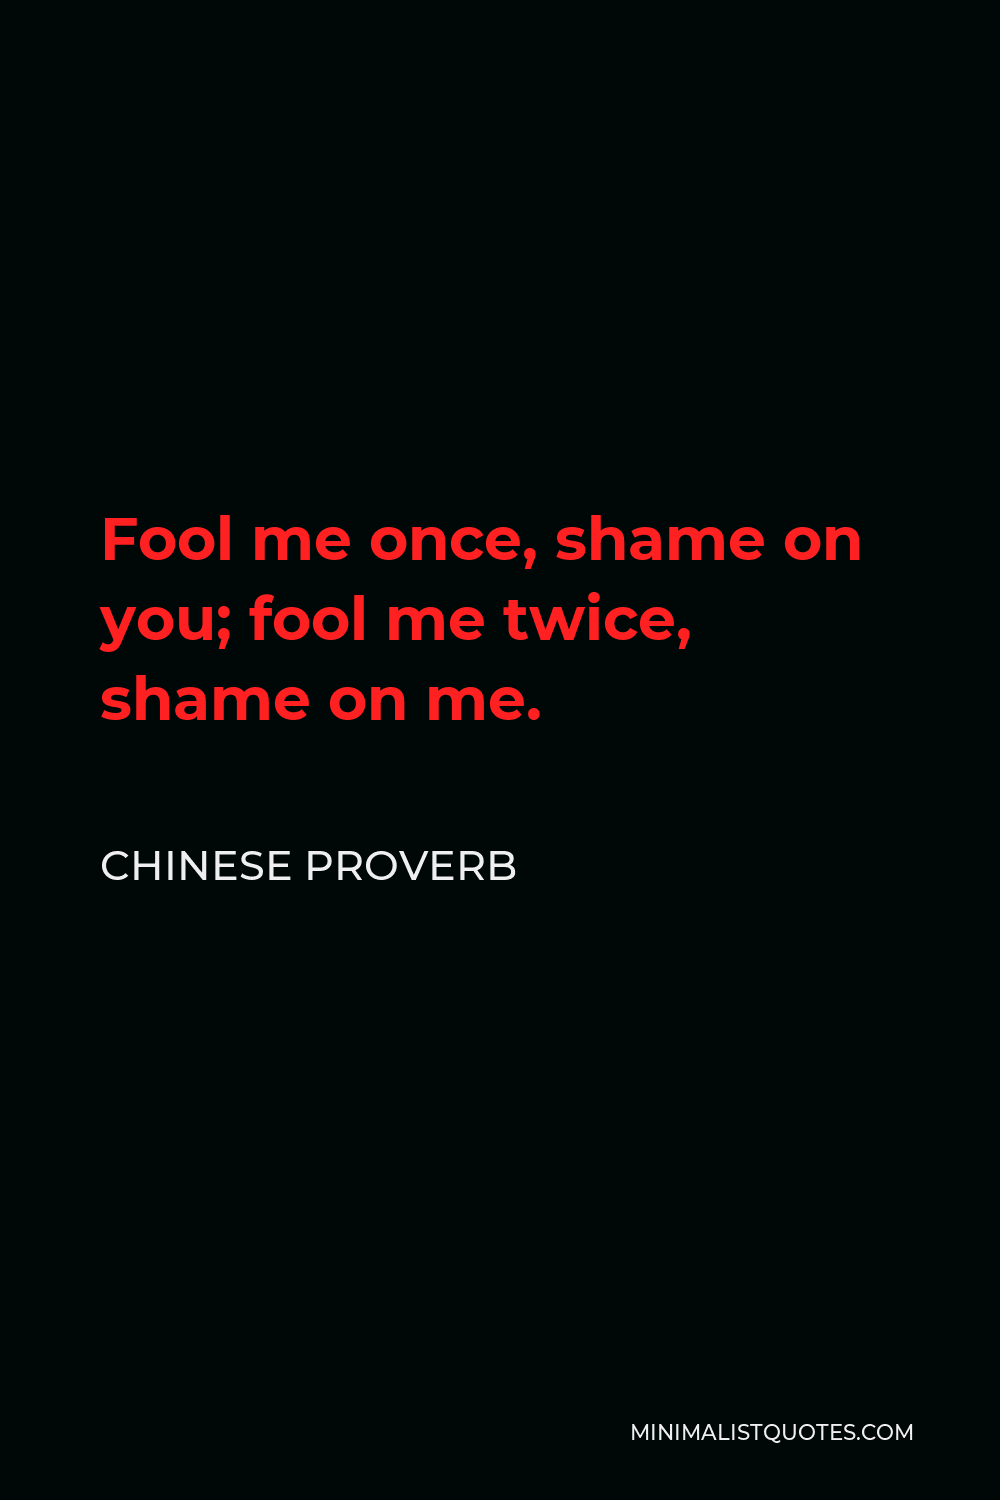 Chinese Proverb Quote - Fool me once, shame on you; fool me twice, shame on me.